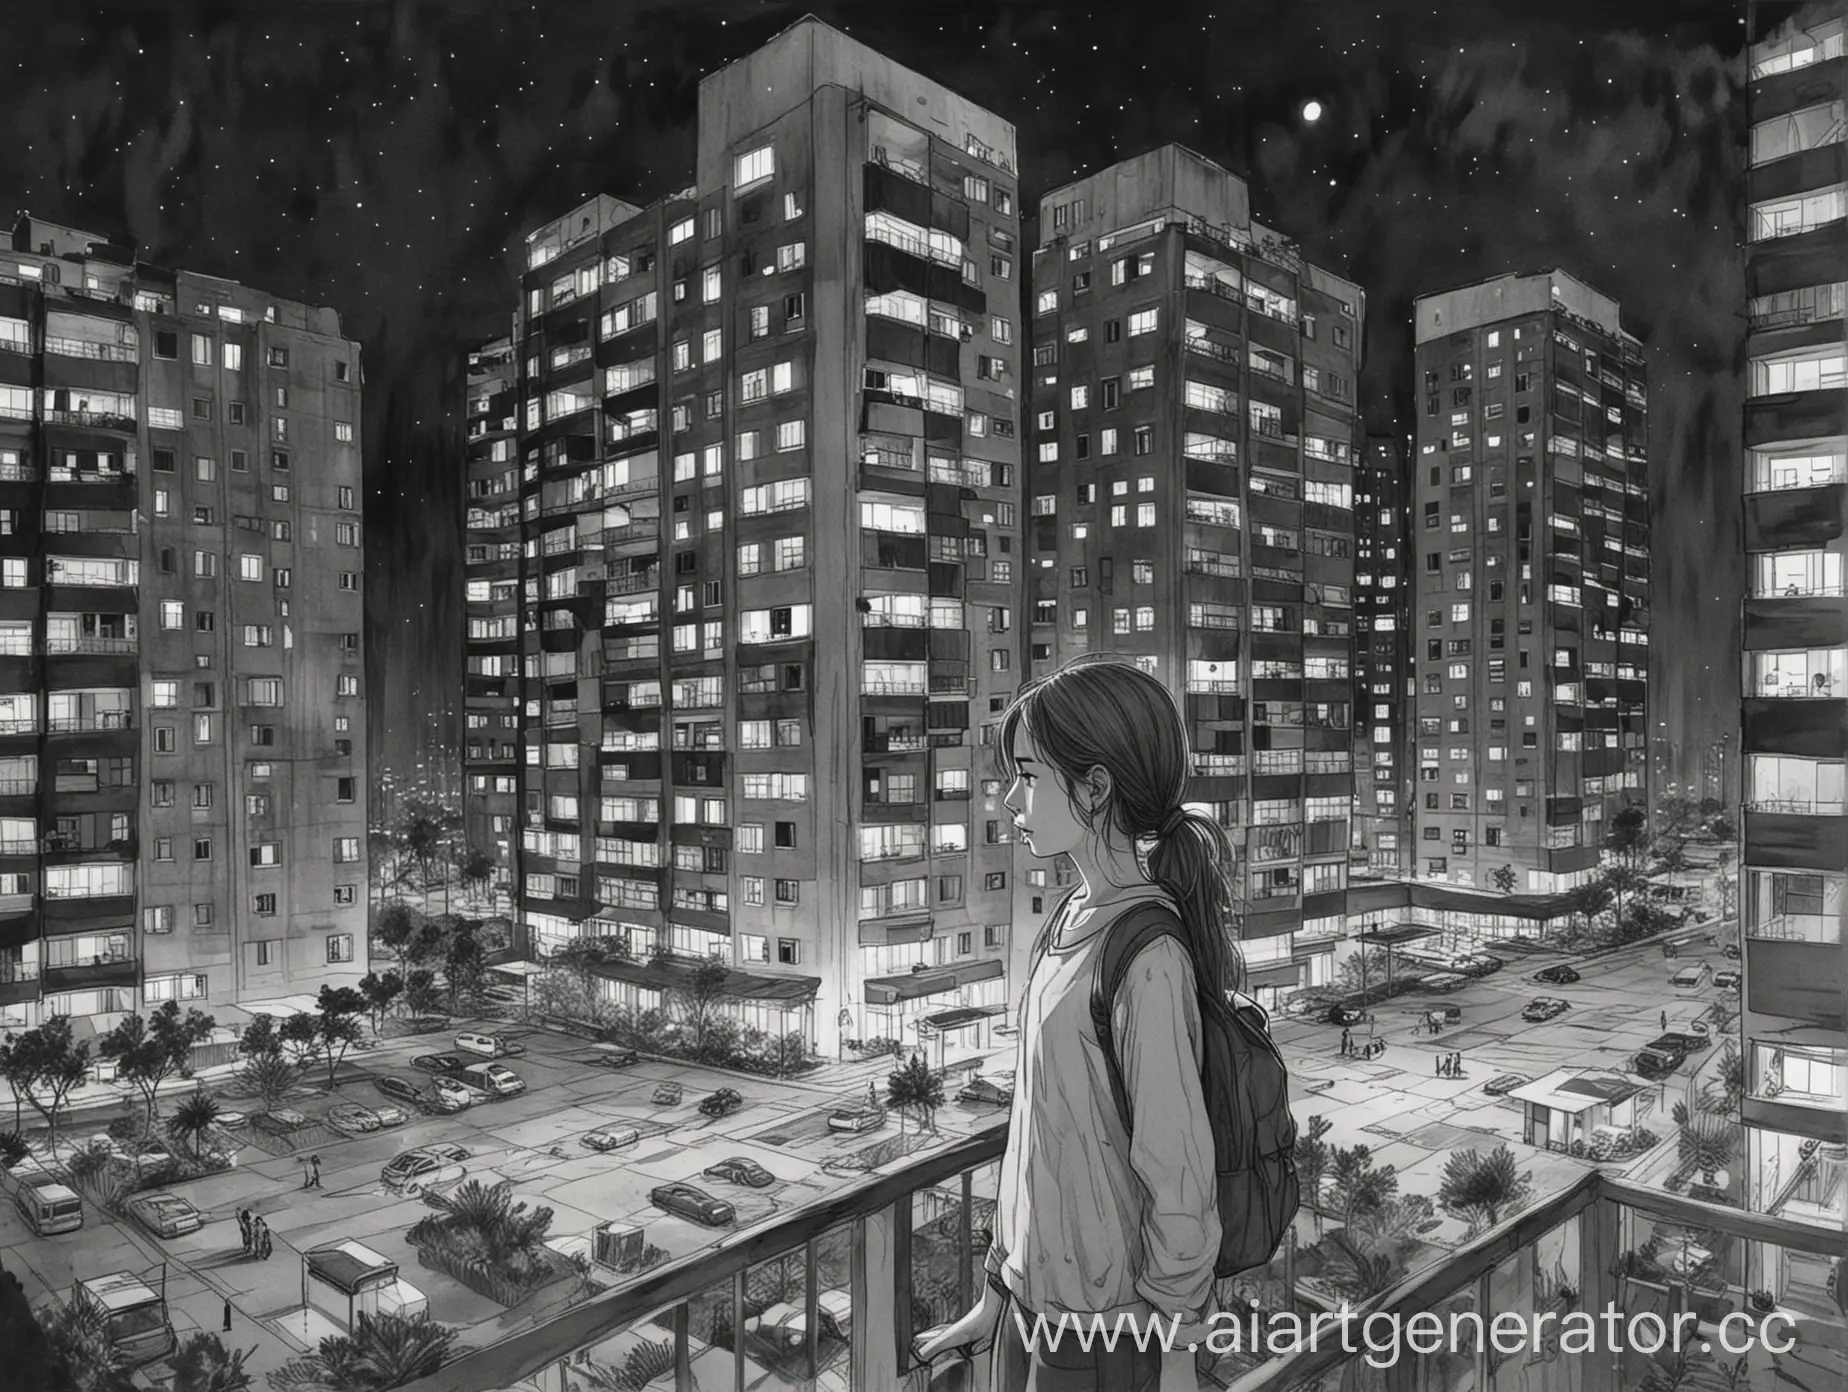 Lost-Girl-in-a-Nighttime-Residential-Complex